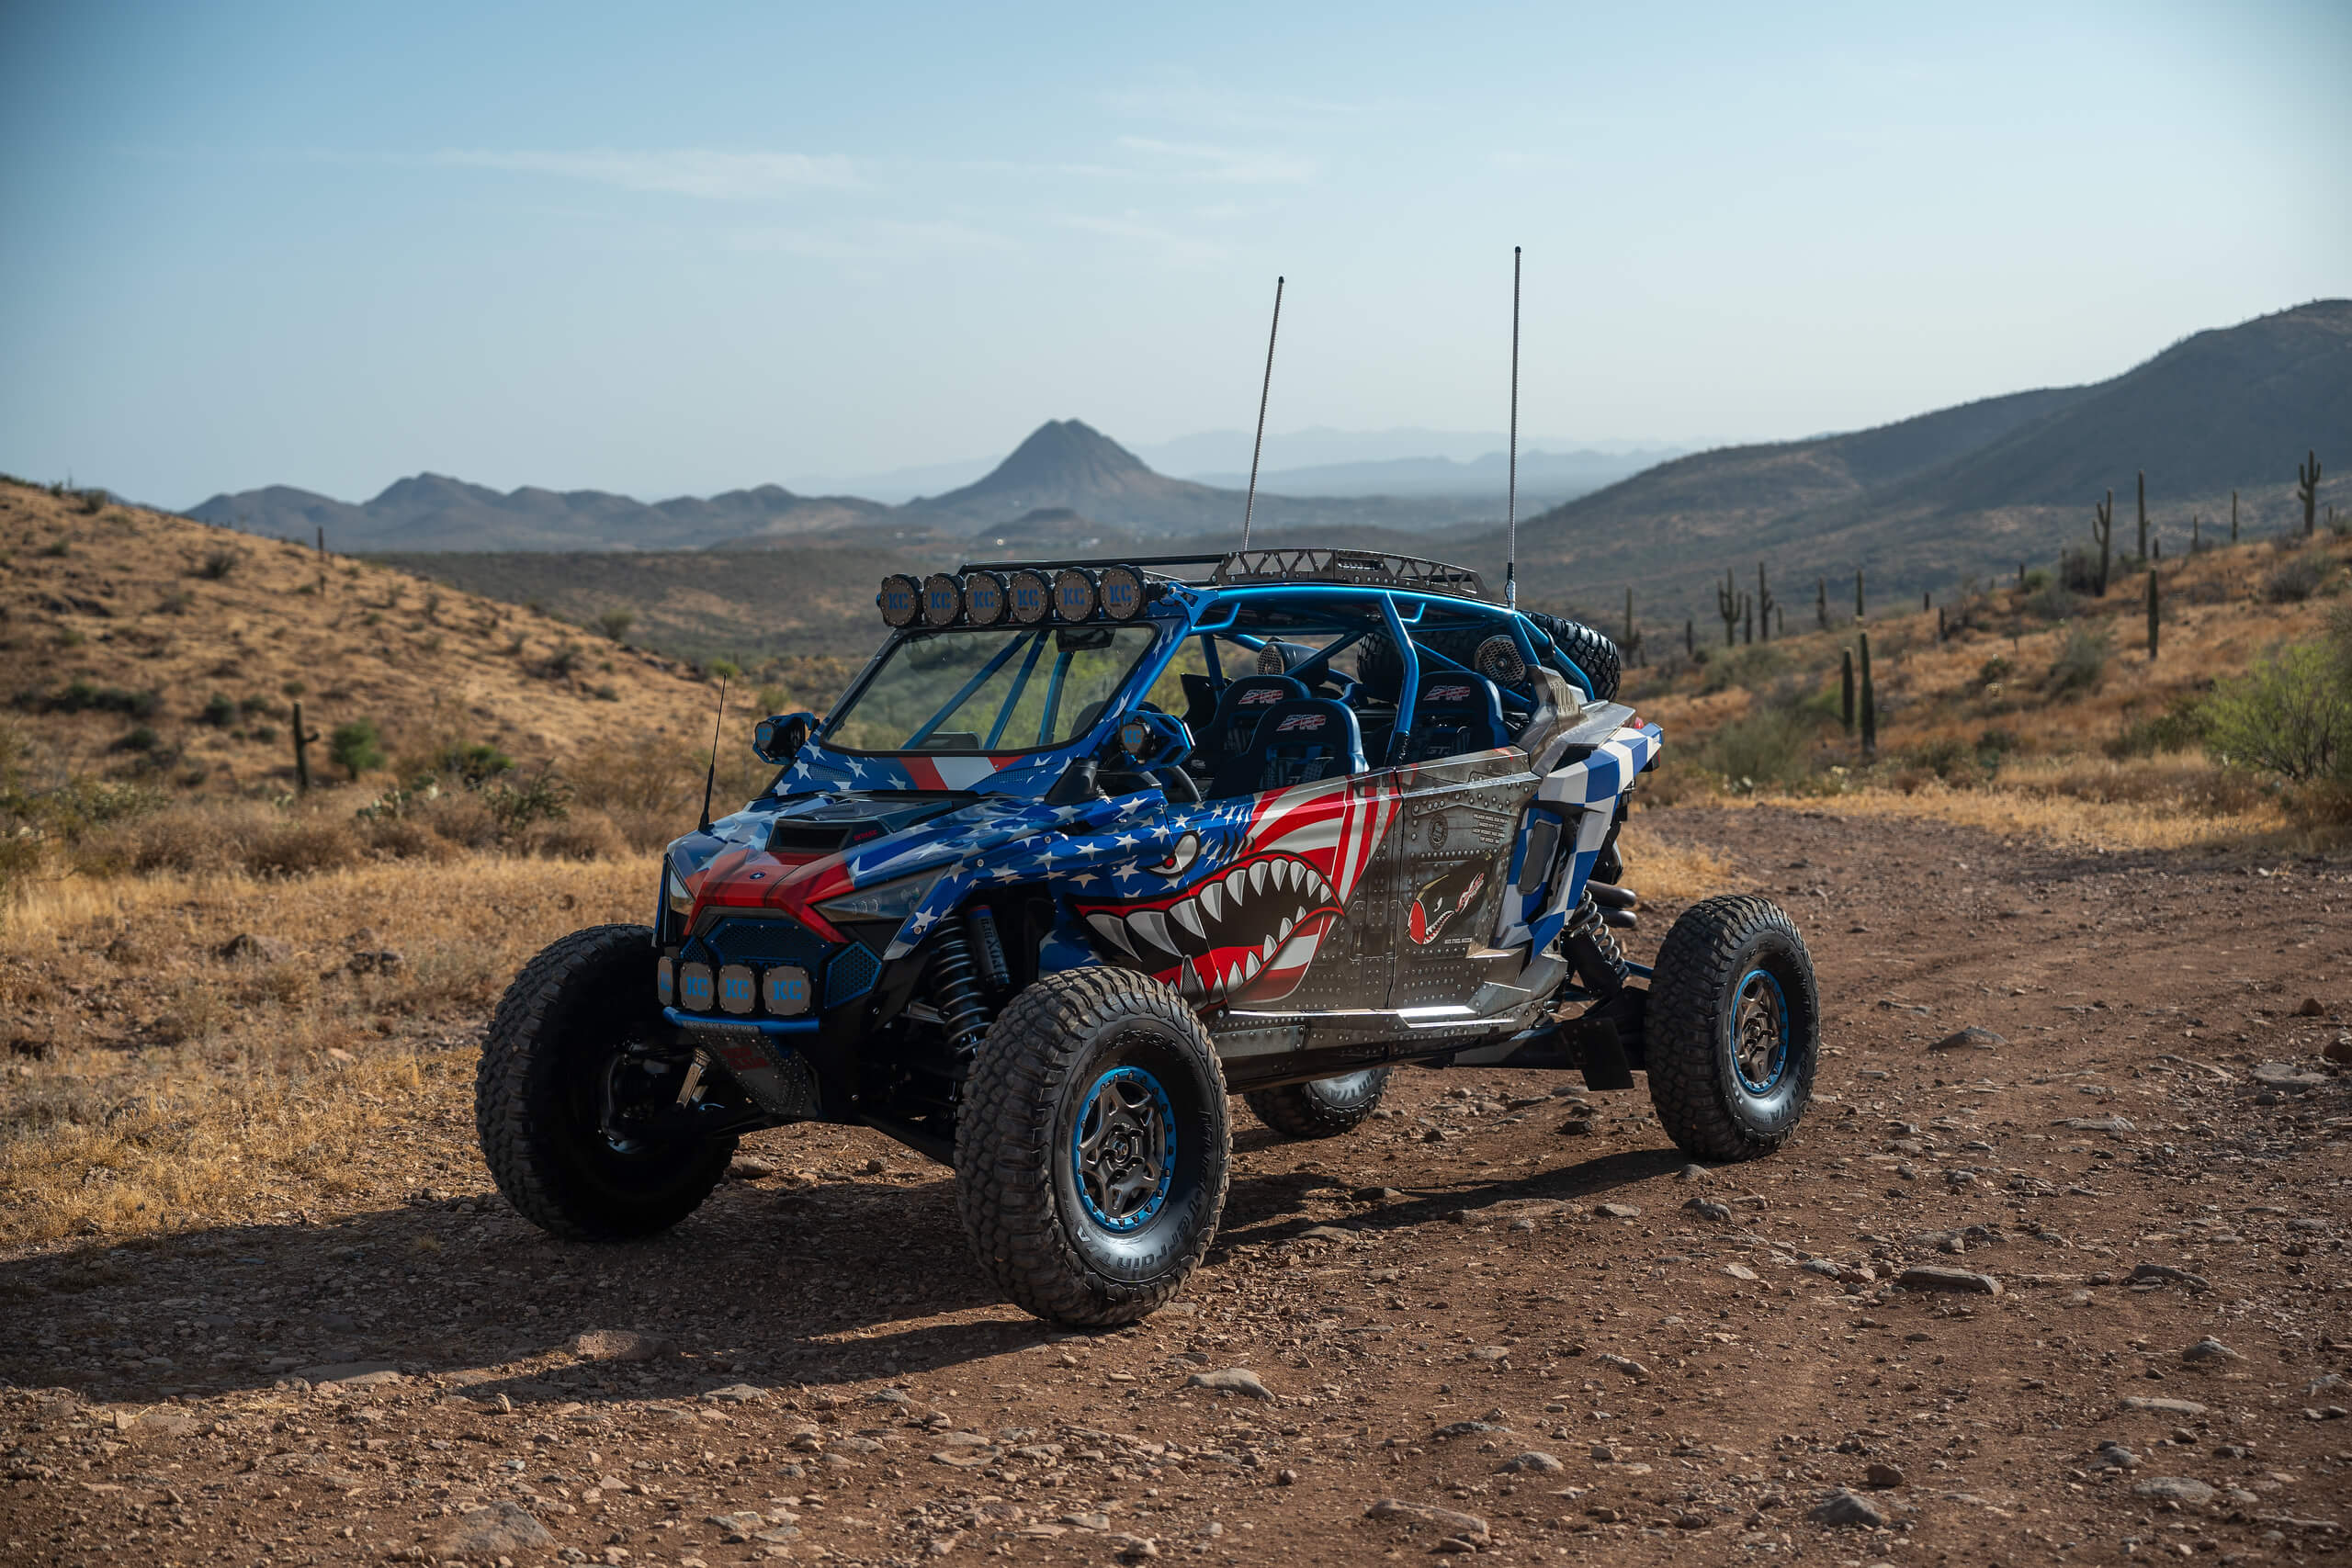 Mike Ericksons Polaris RZR Pro R Custom Build By Jagged X Offroad 2